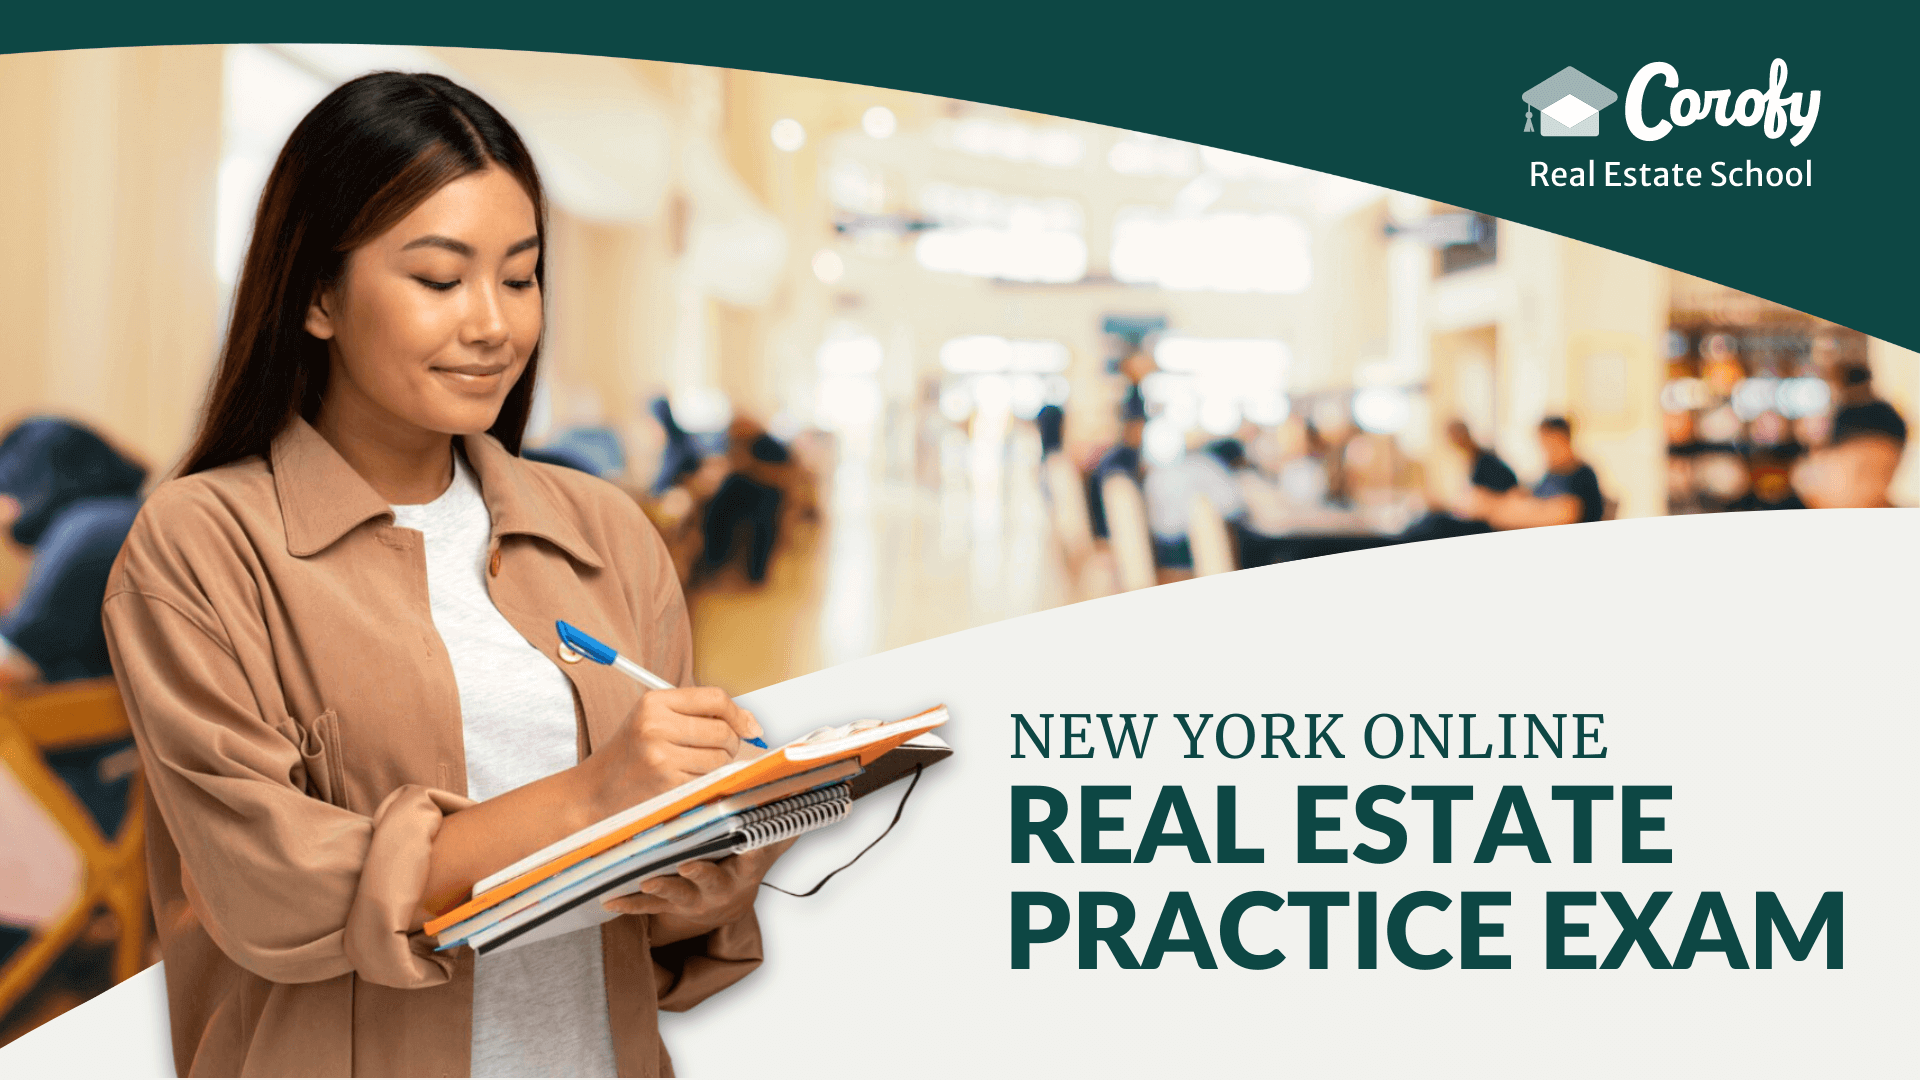 NY Online Real Estate Practice Exam